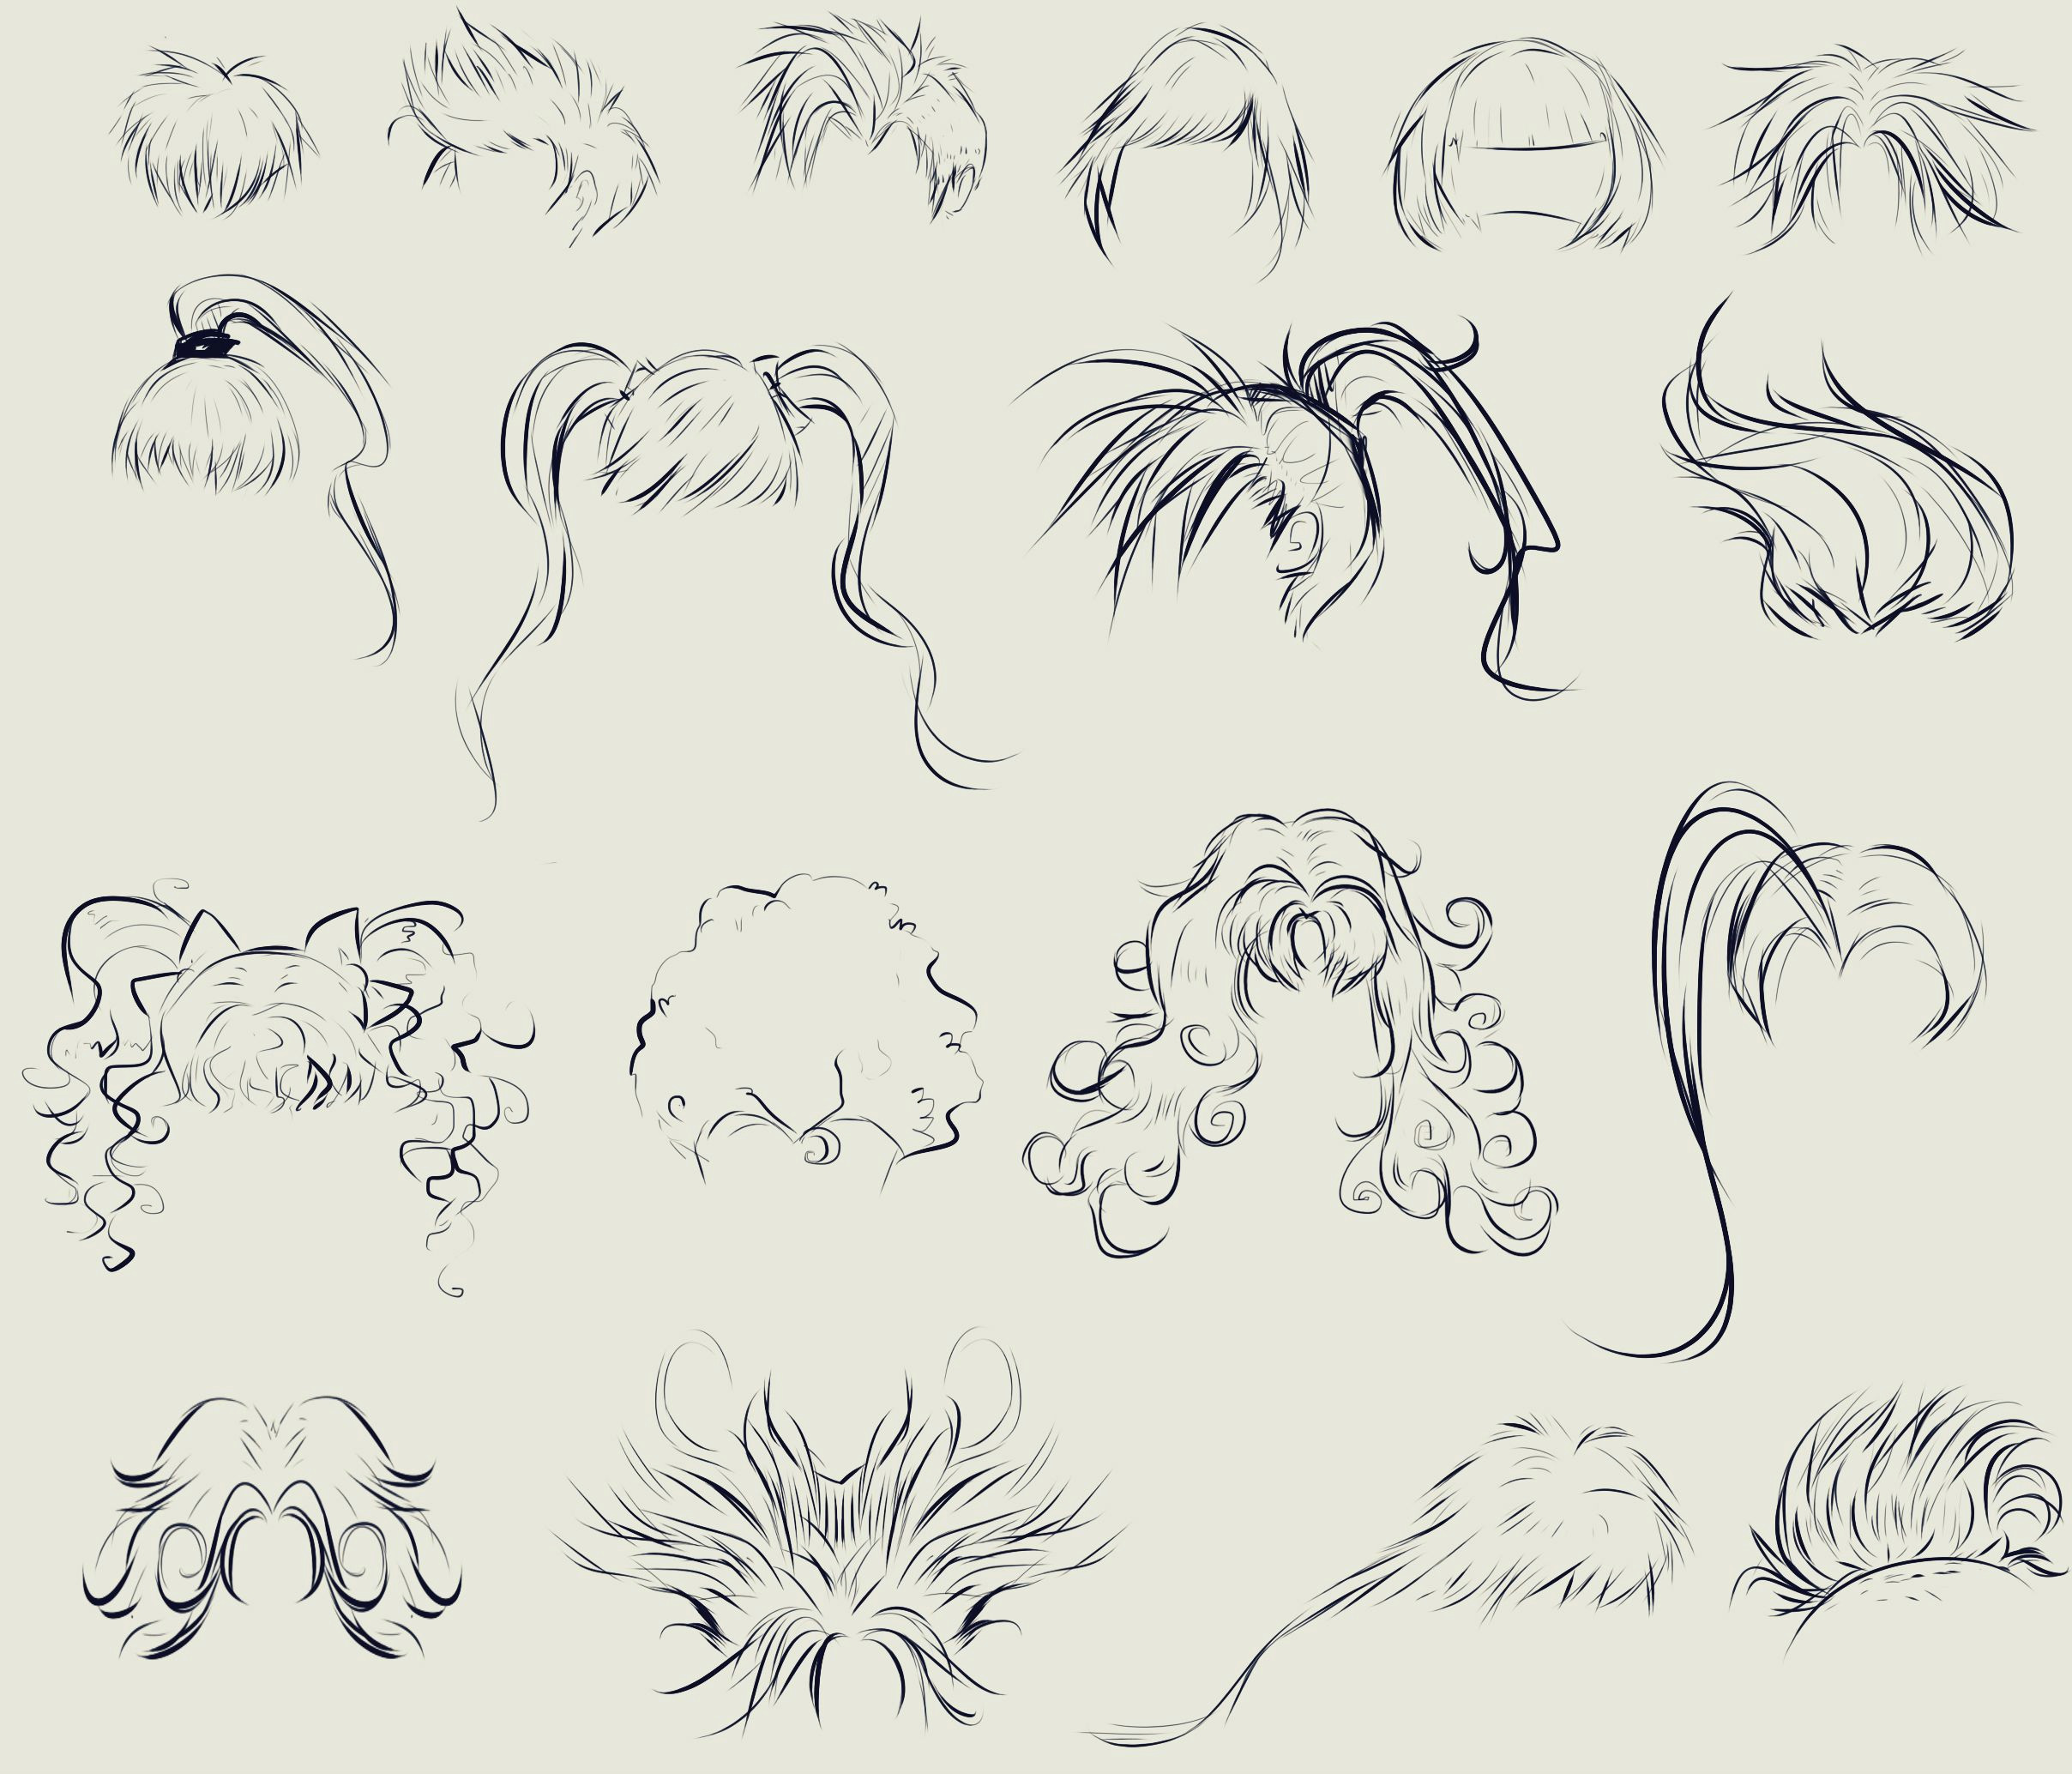 How to Draw Long Anime Hair This Anime Hair Reference Sheet by Ryky is All You Need to